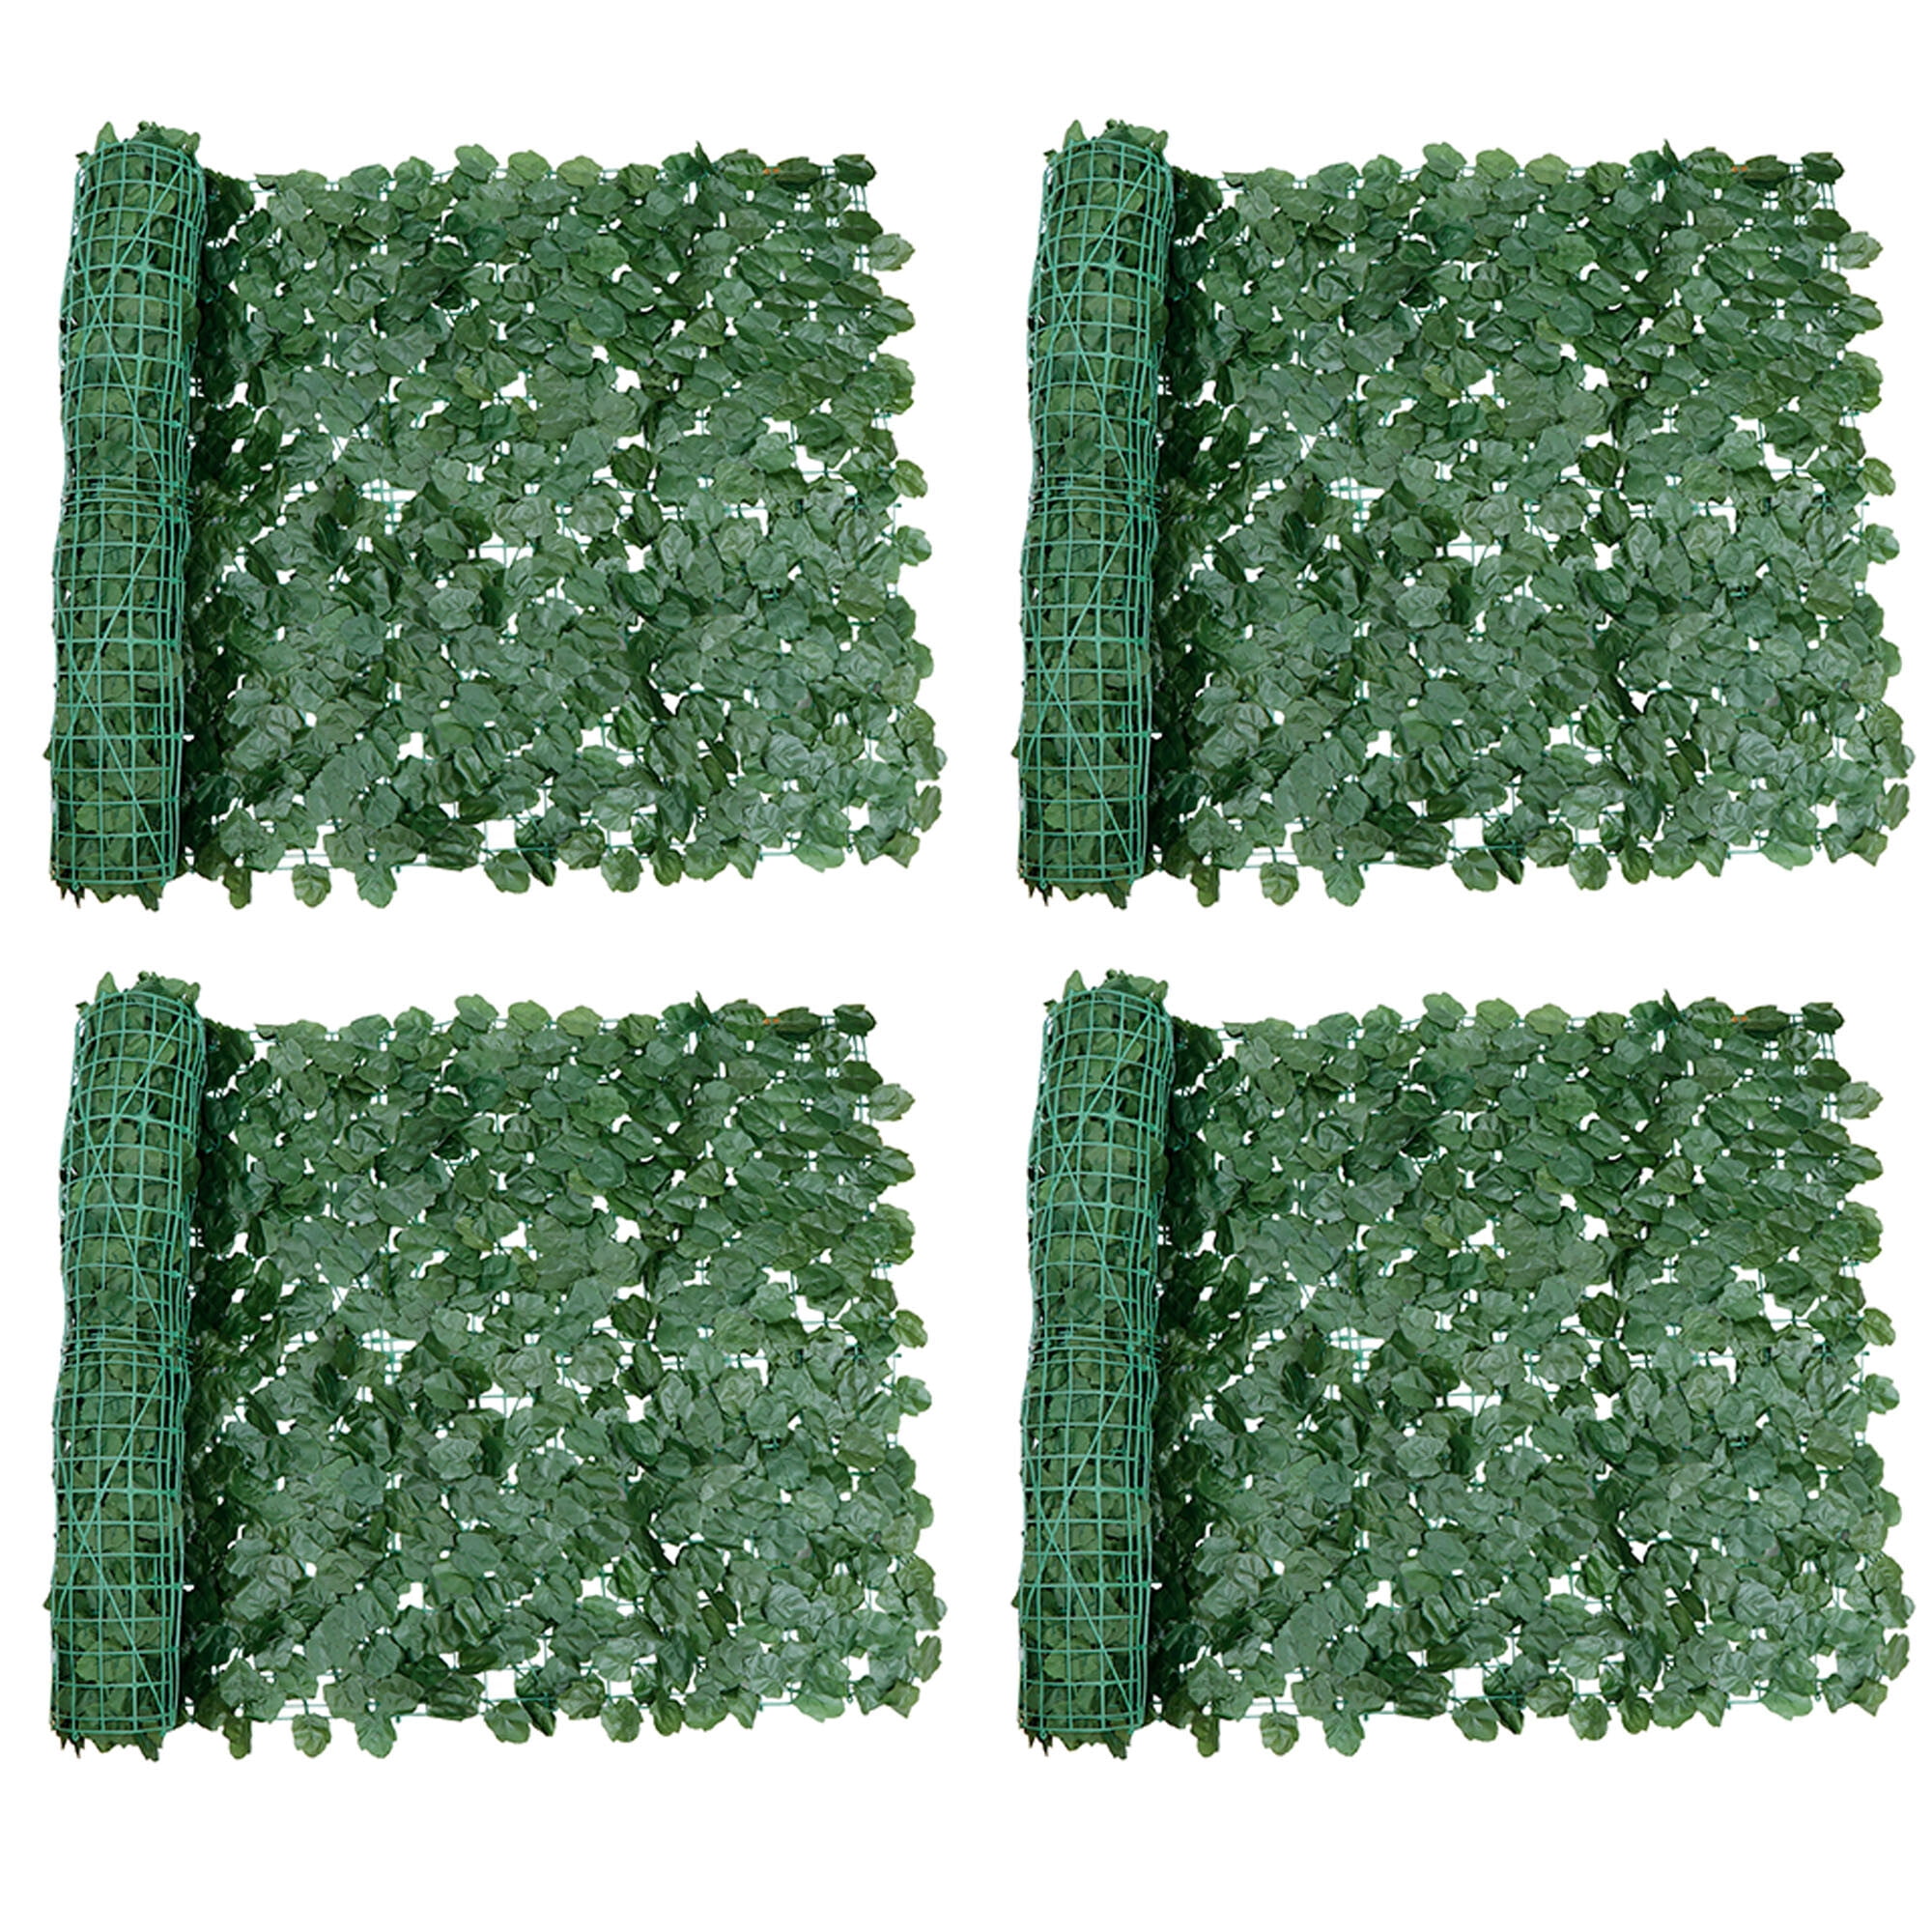 Faux Ivy Leaf Decorative Privacy Fence-59 x 118